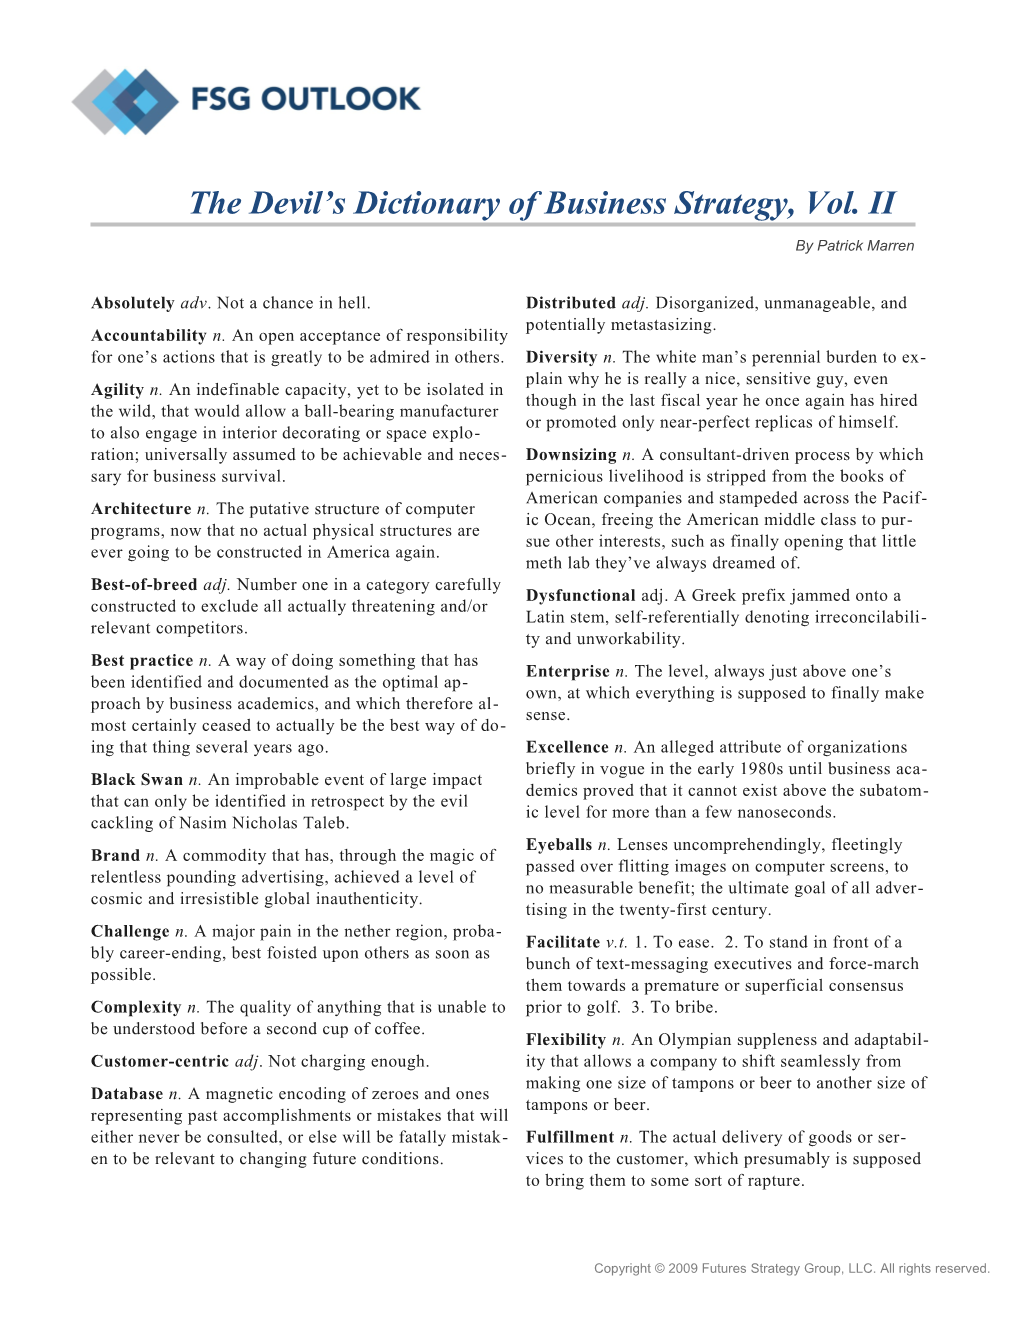 The Devil S Dictionary of Business Strategy, Vol. II